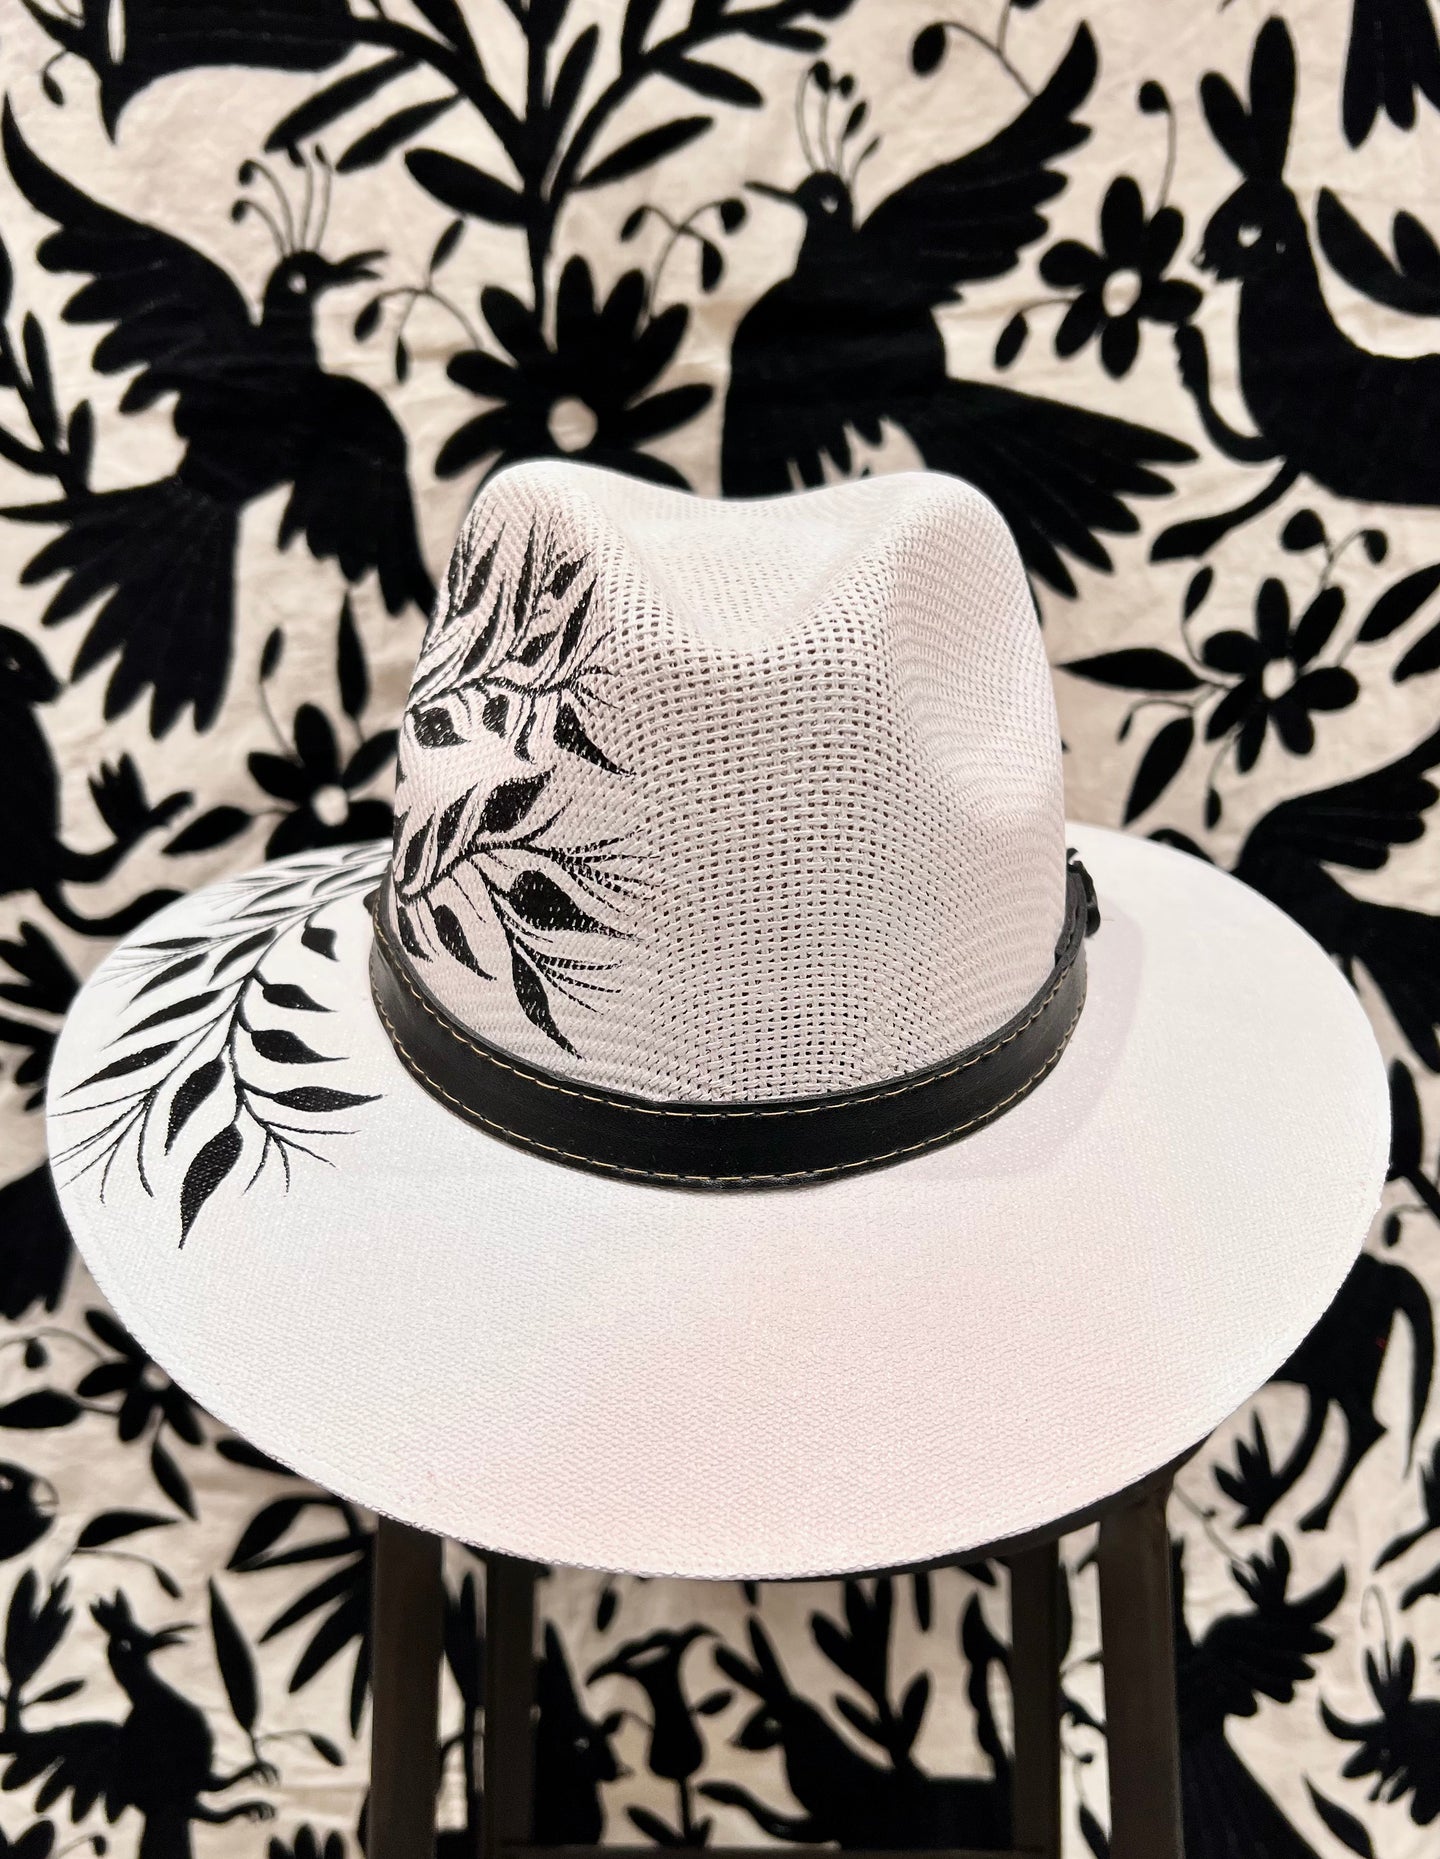 Mexican Hand Painted Sombrero — Black Blossoms